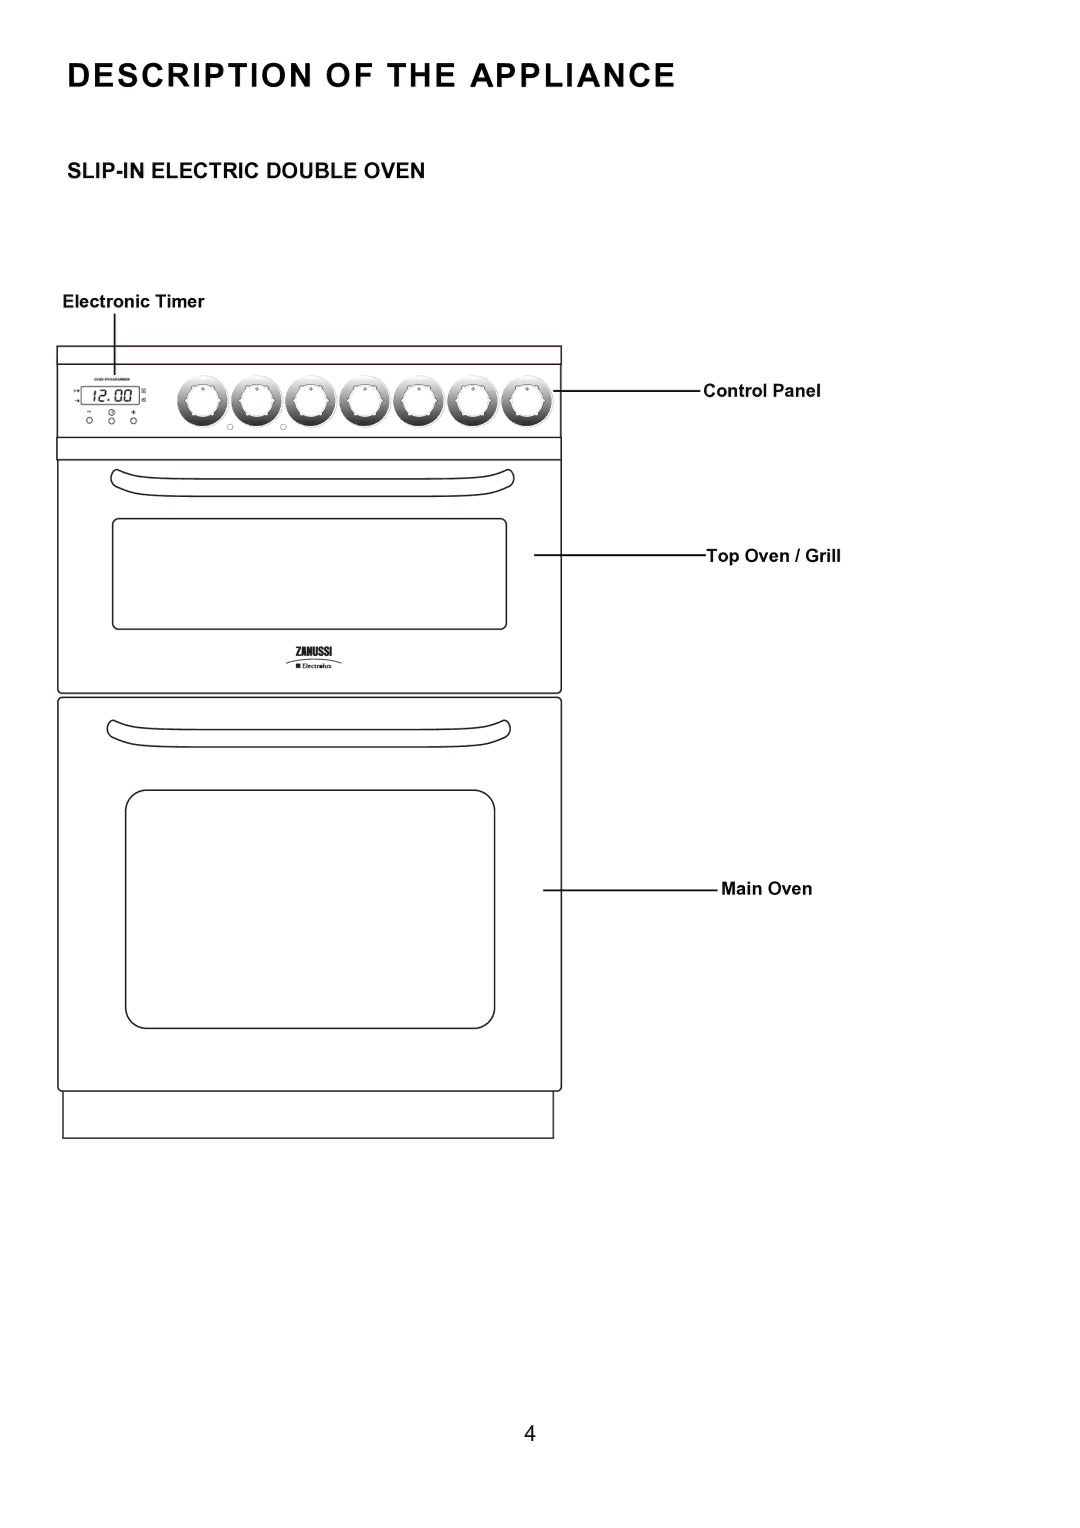 Zanussi ZCE 7550, ZCE 7551 manual Description of the Appliance, SLIP-IN Electric Double Oven, Electronic Timer 